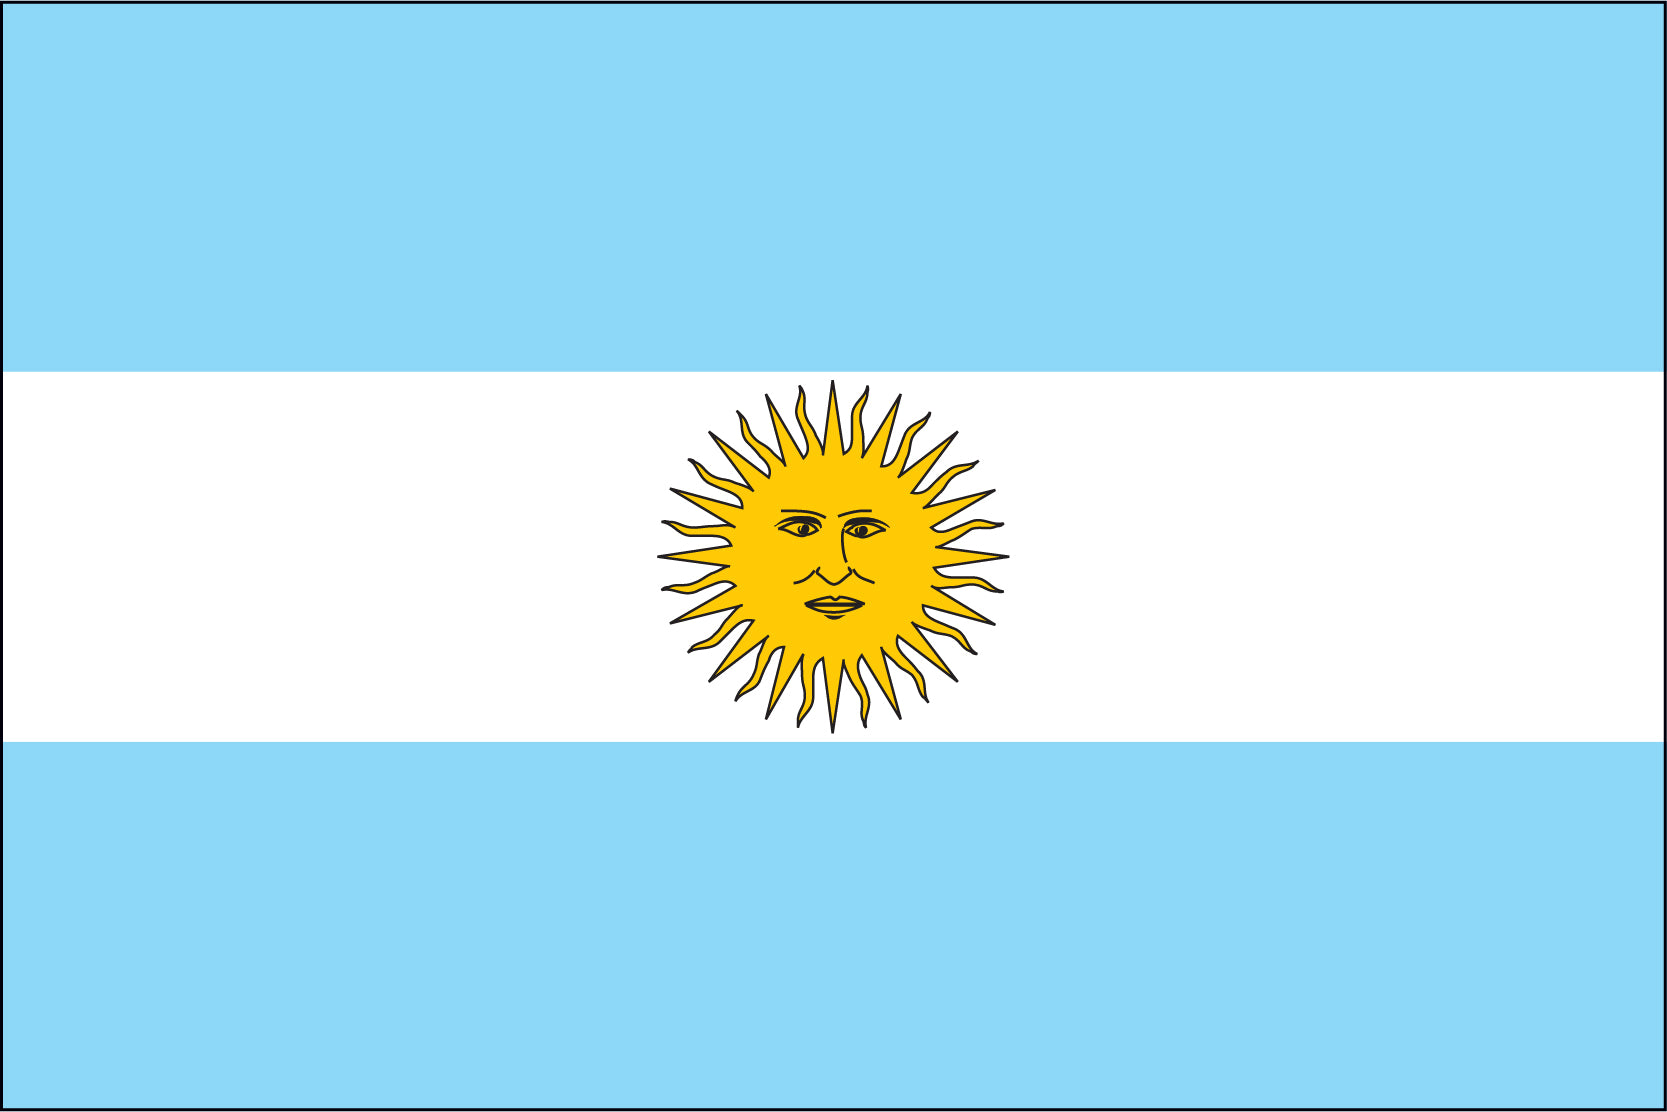 Argentina - Governmental Seal